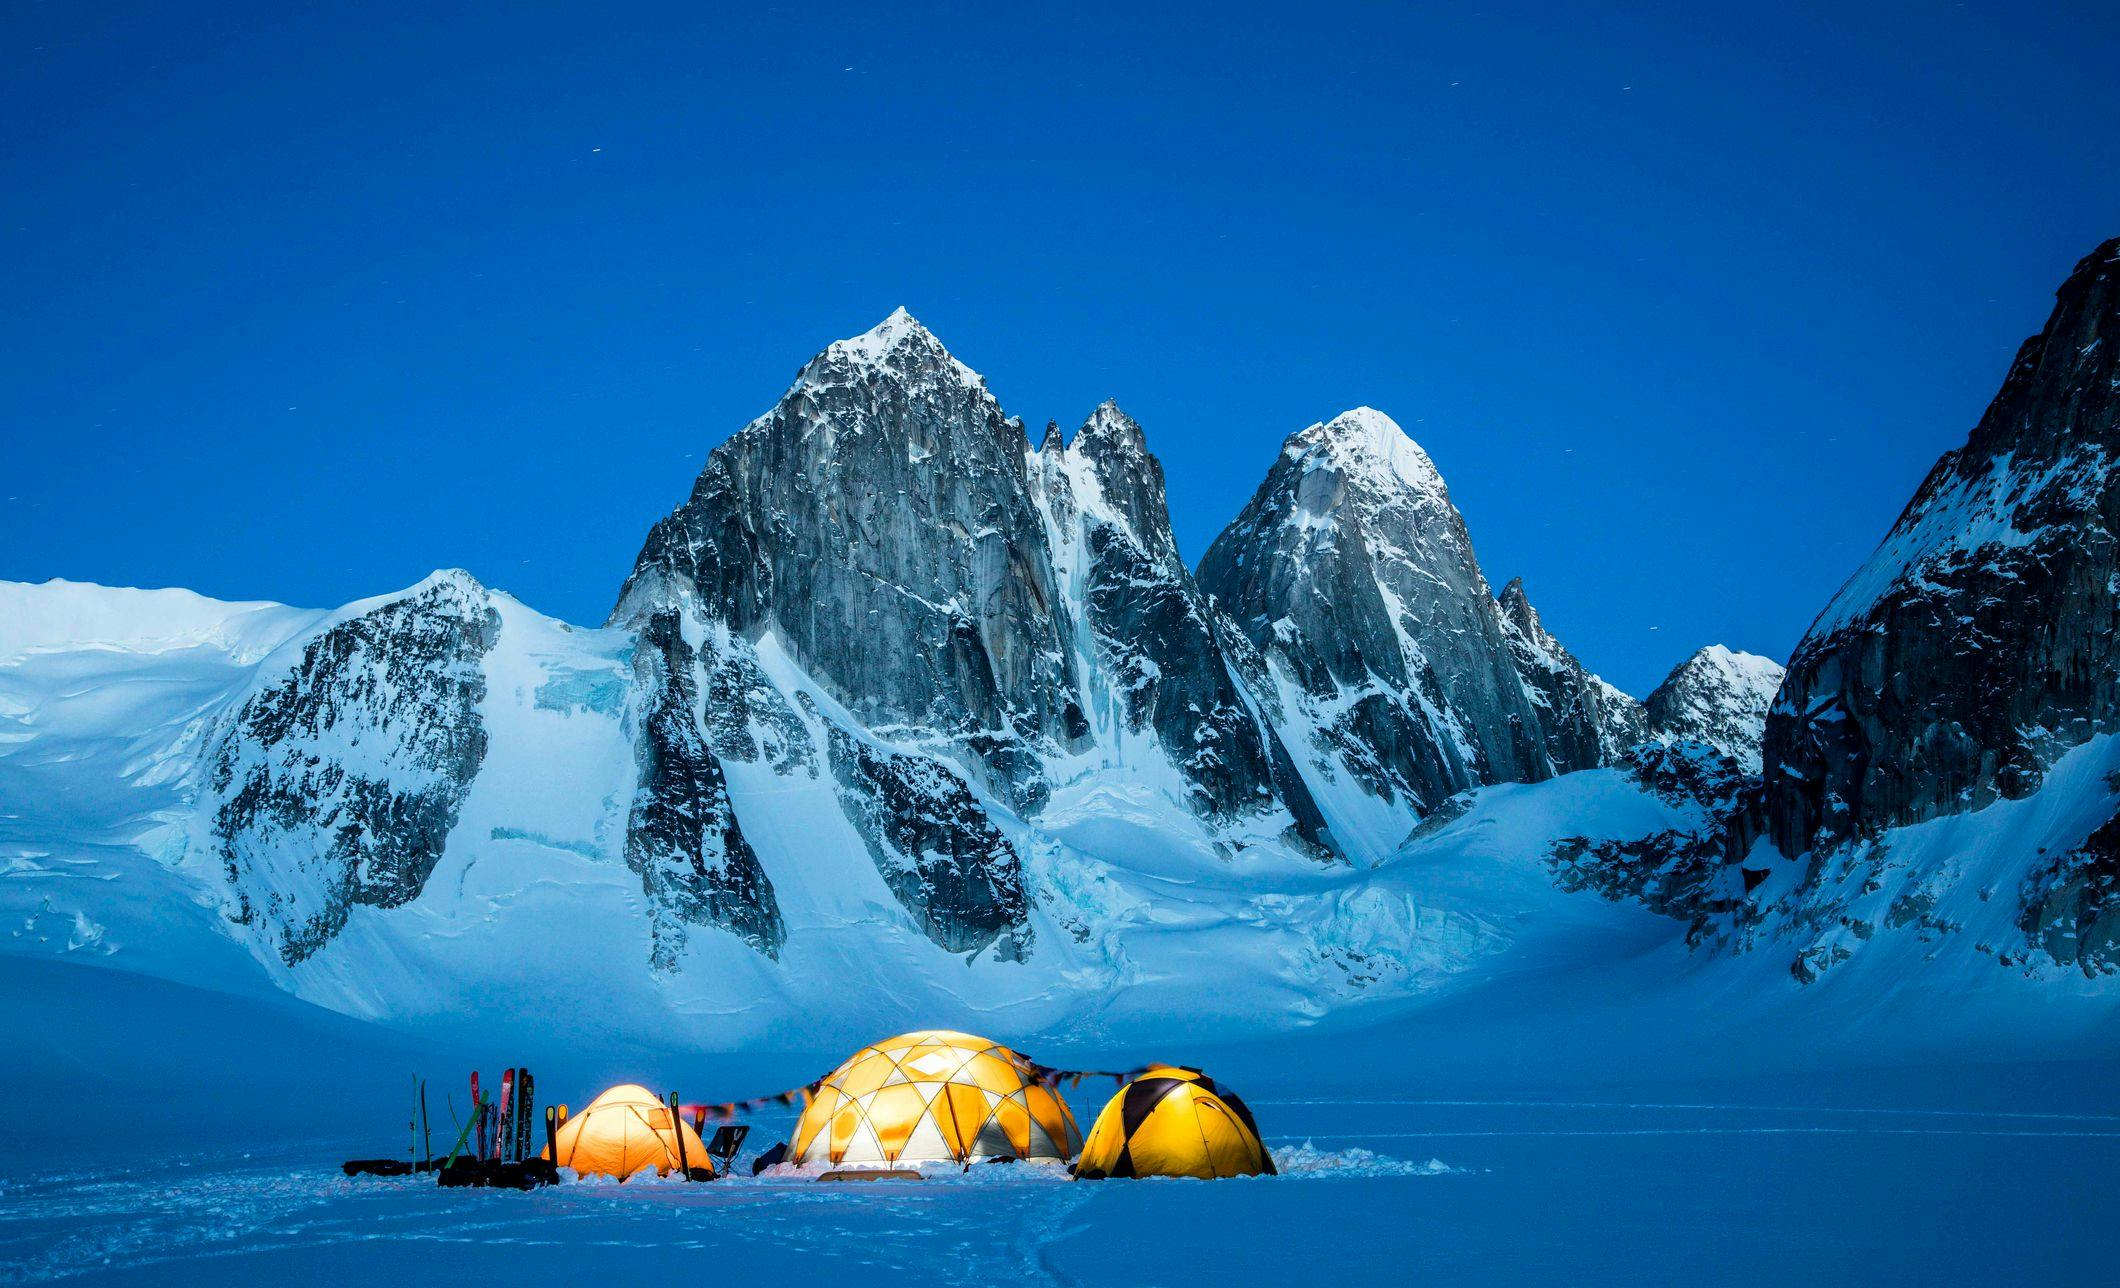 Three lit up domes on a vast snowy field with skis outside and mountains in the background